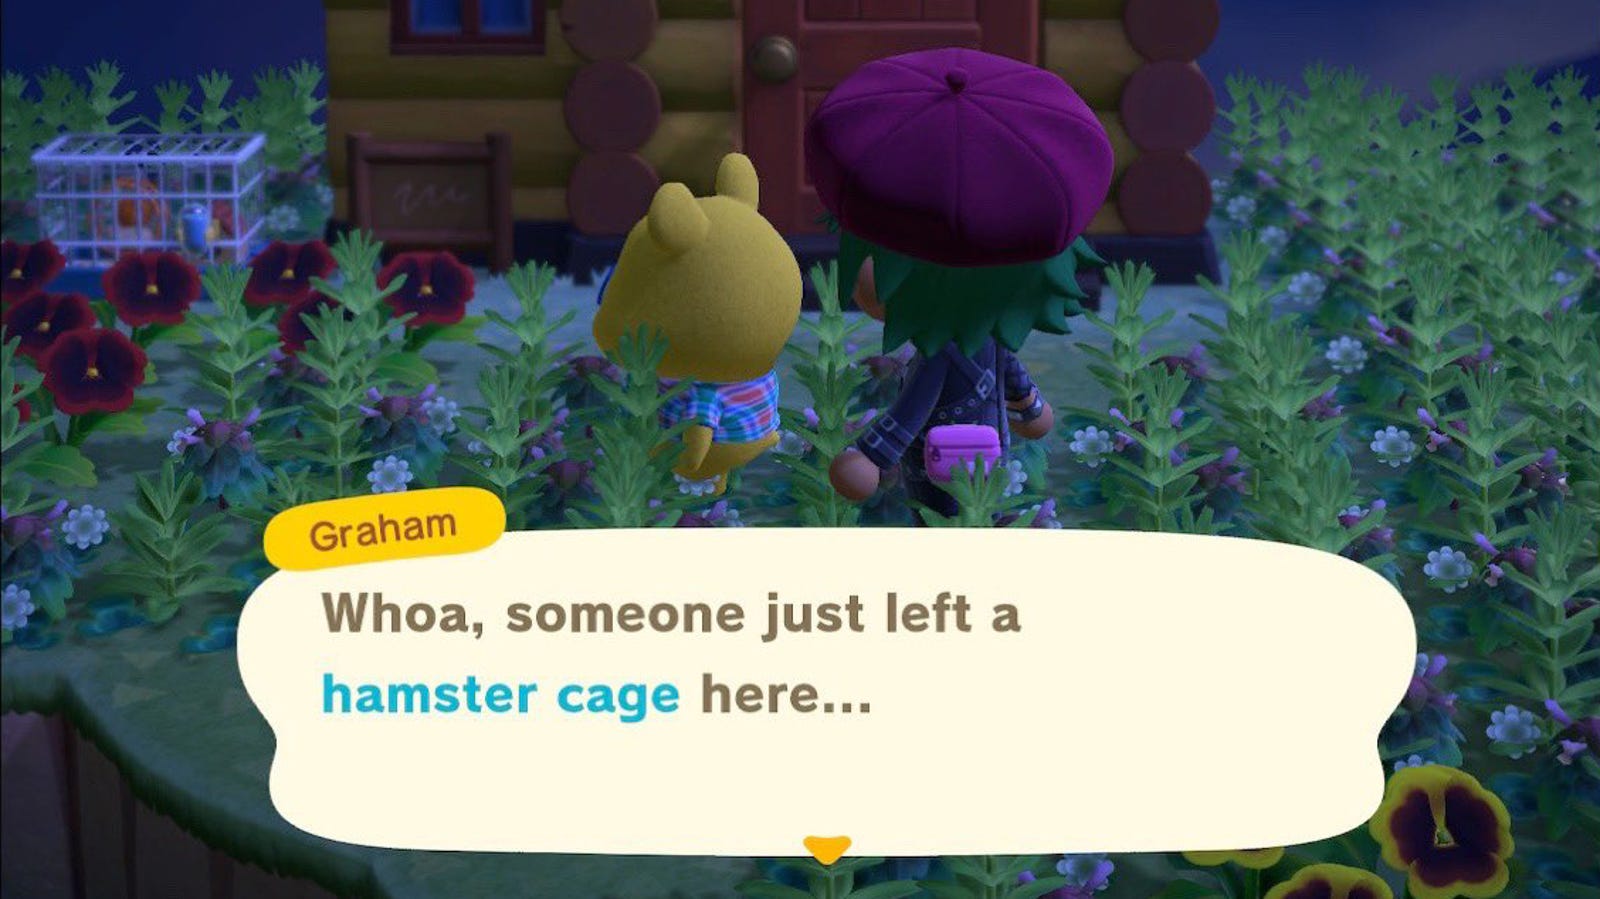 Getting A Bad Animal Crossing: New Horizons Villager To Leave